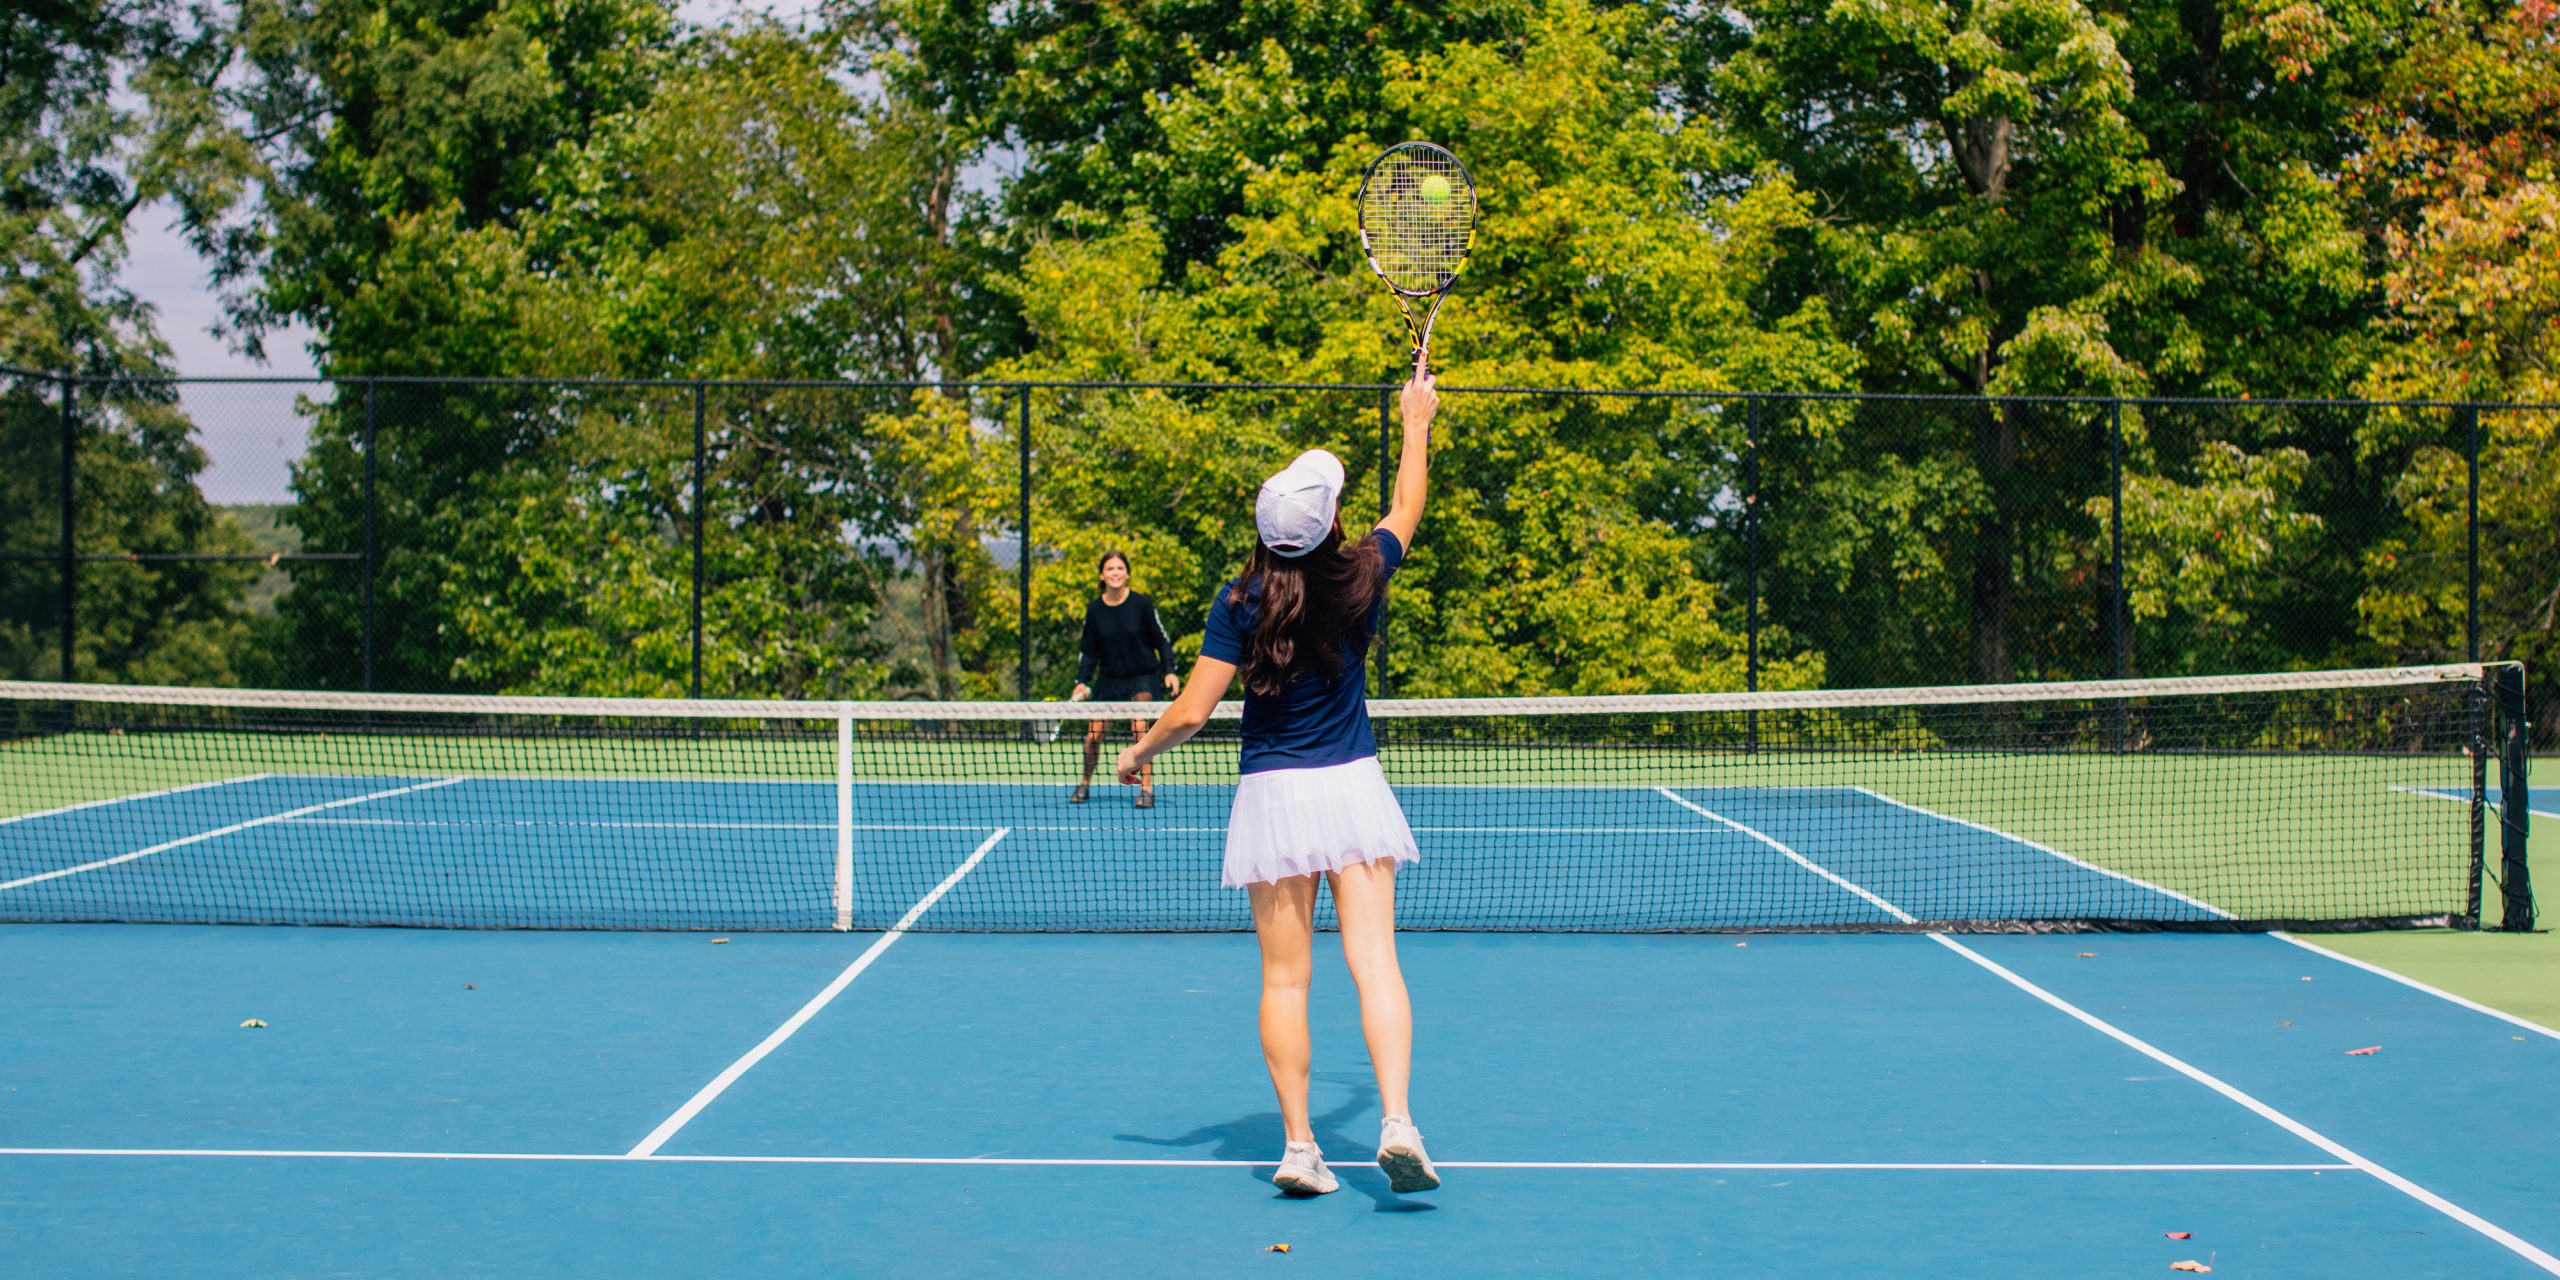 Two people playing tennis